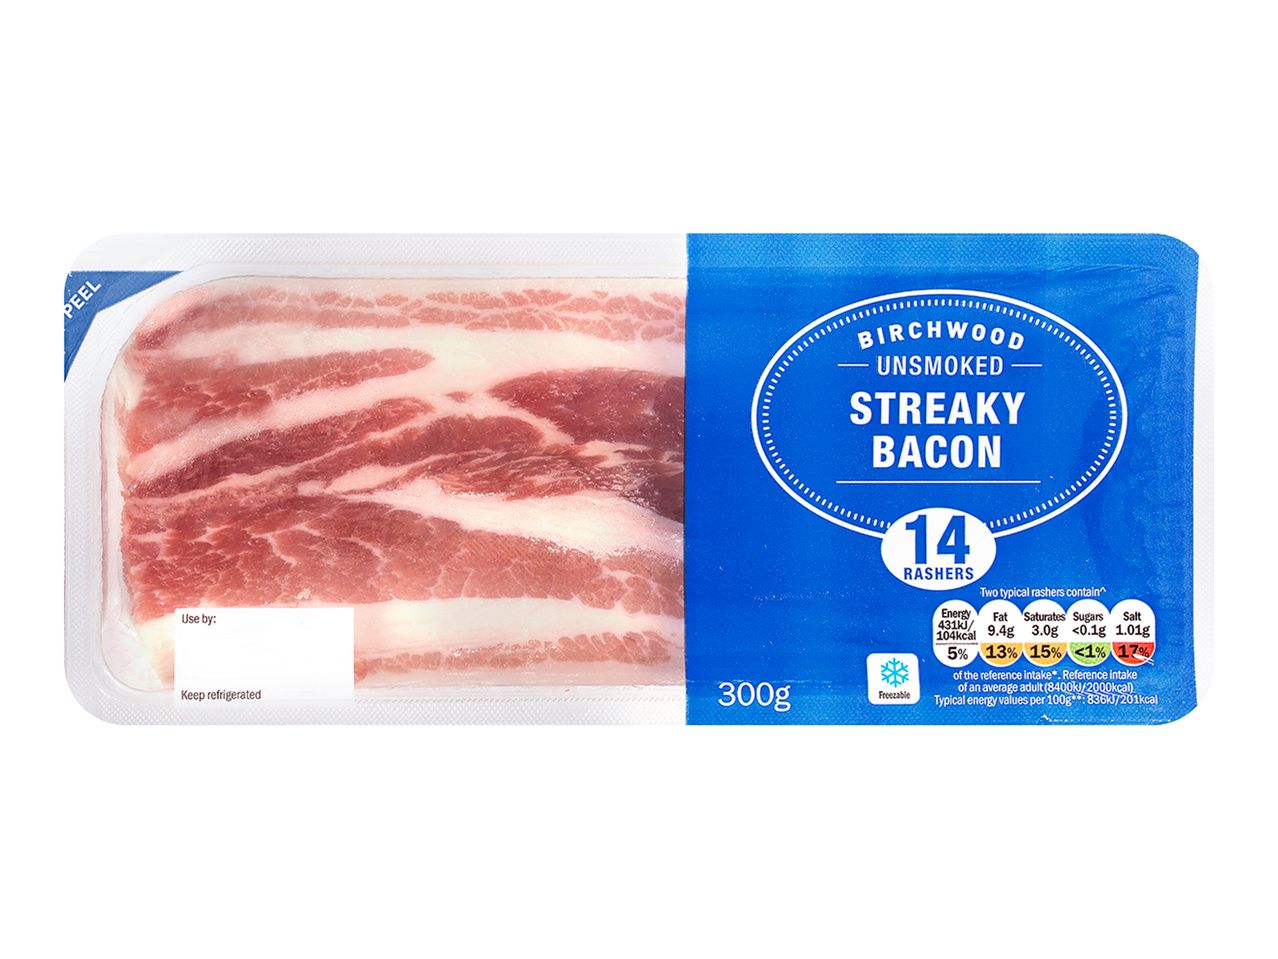 Go to full screen view: Birchwood Streaky Bacon Assorted - Image 1